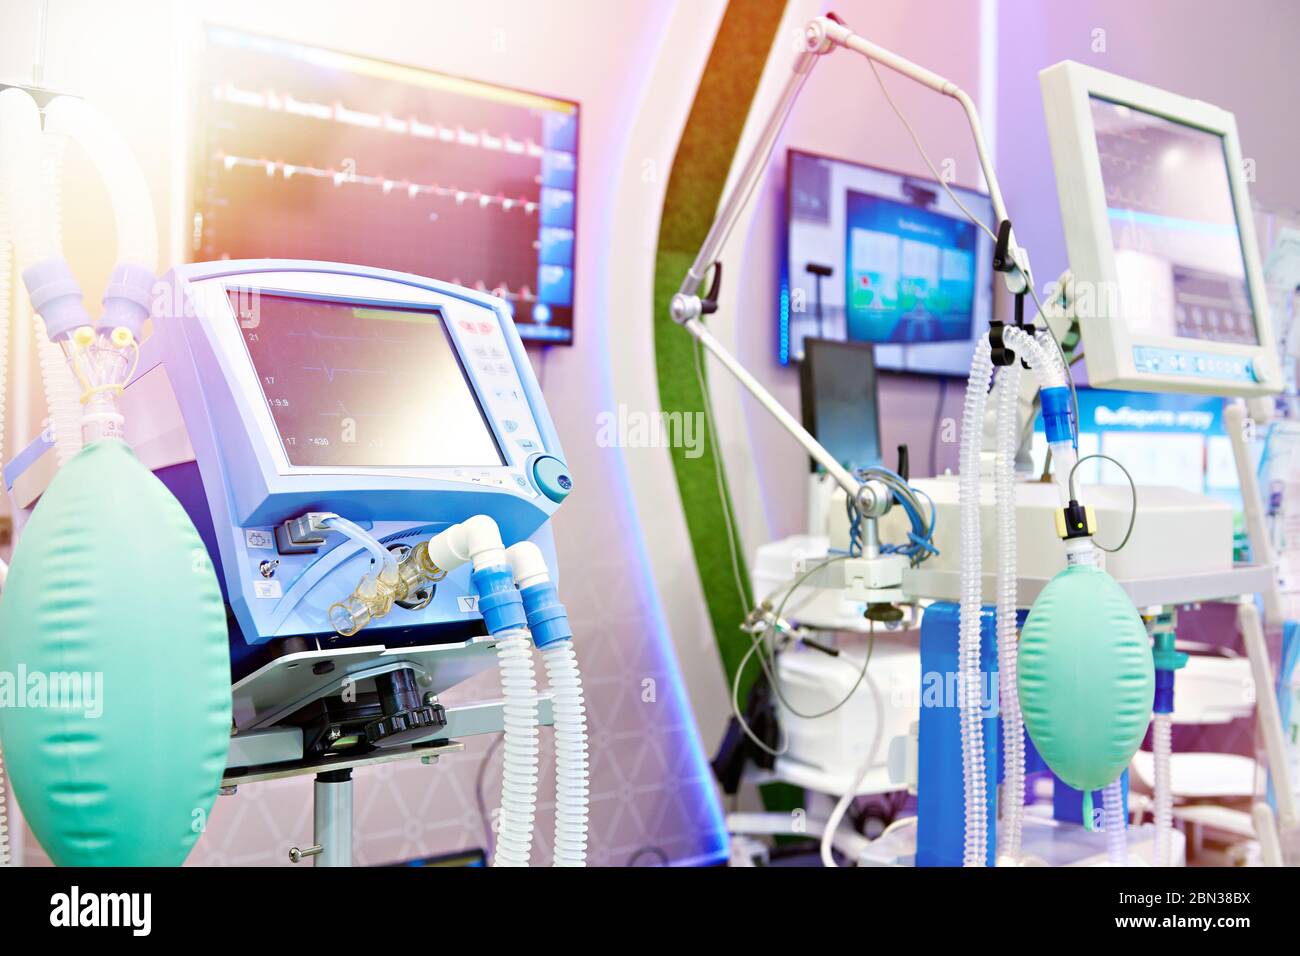 Medical equipment at the exhibition Stock Photo